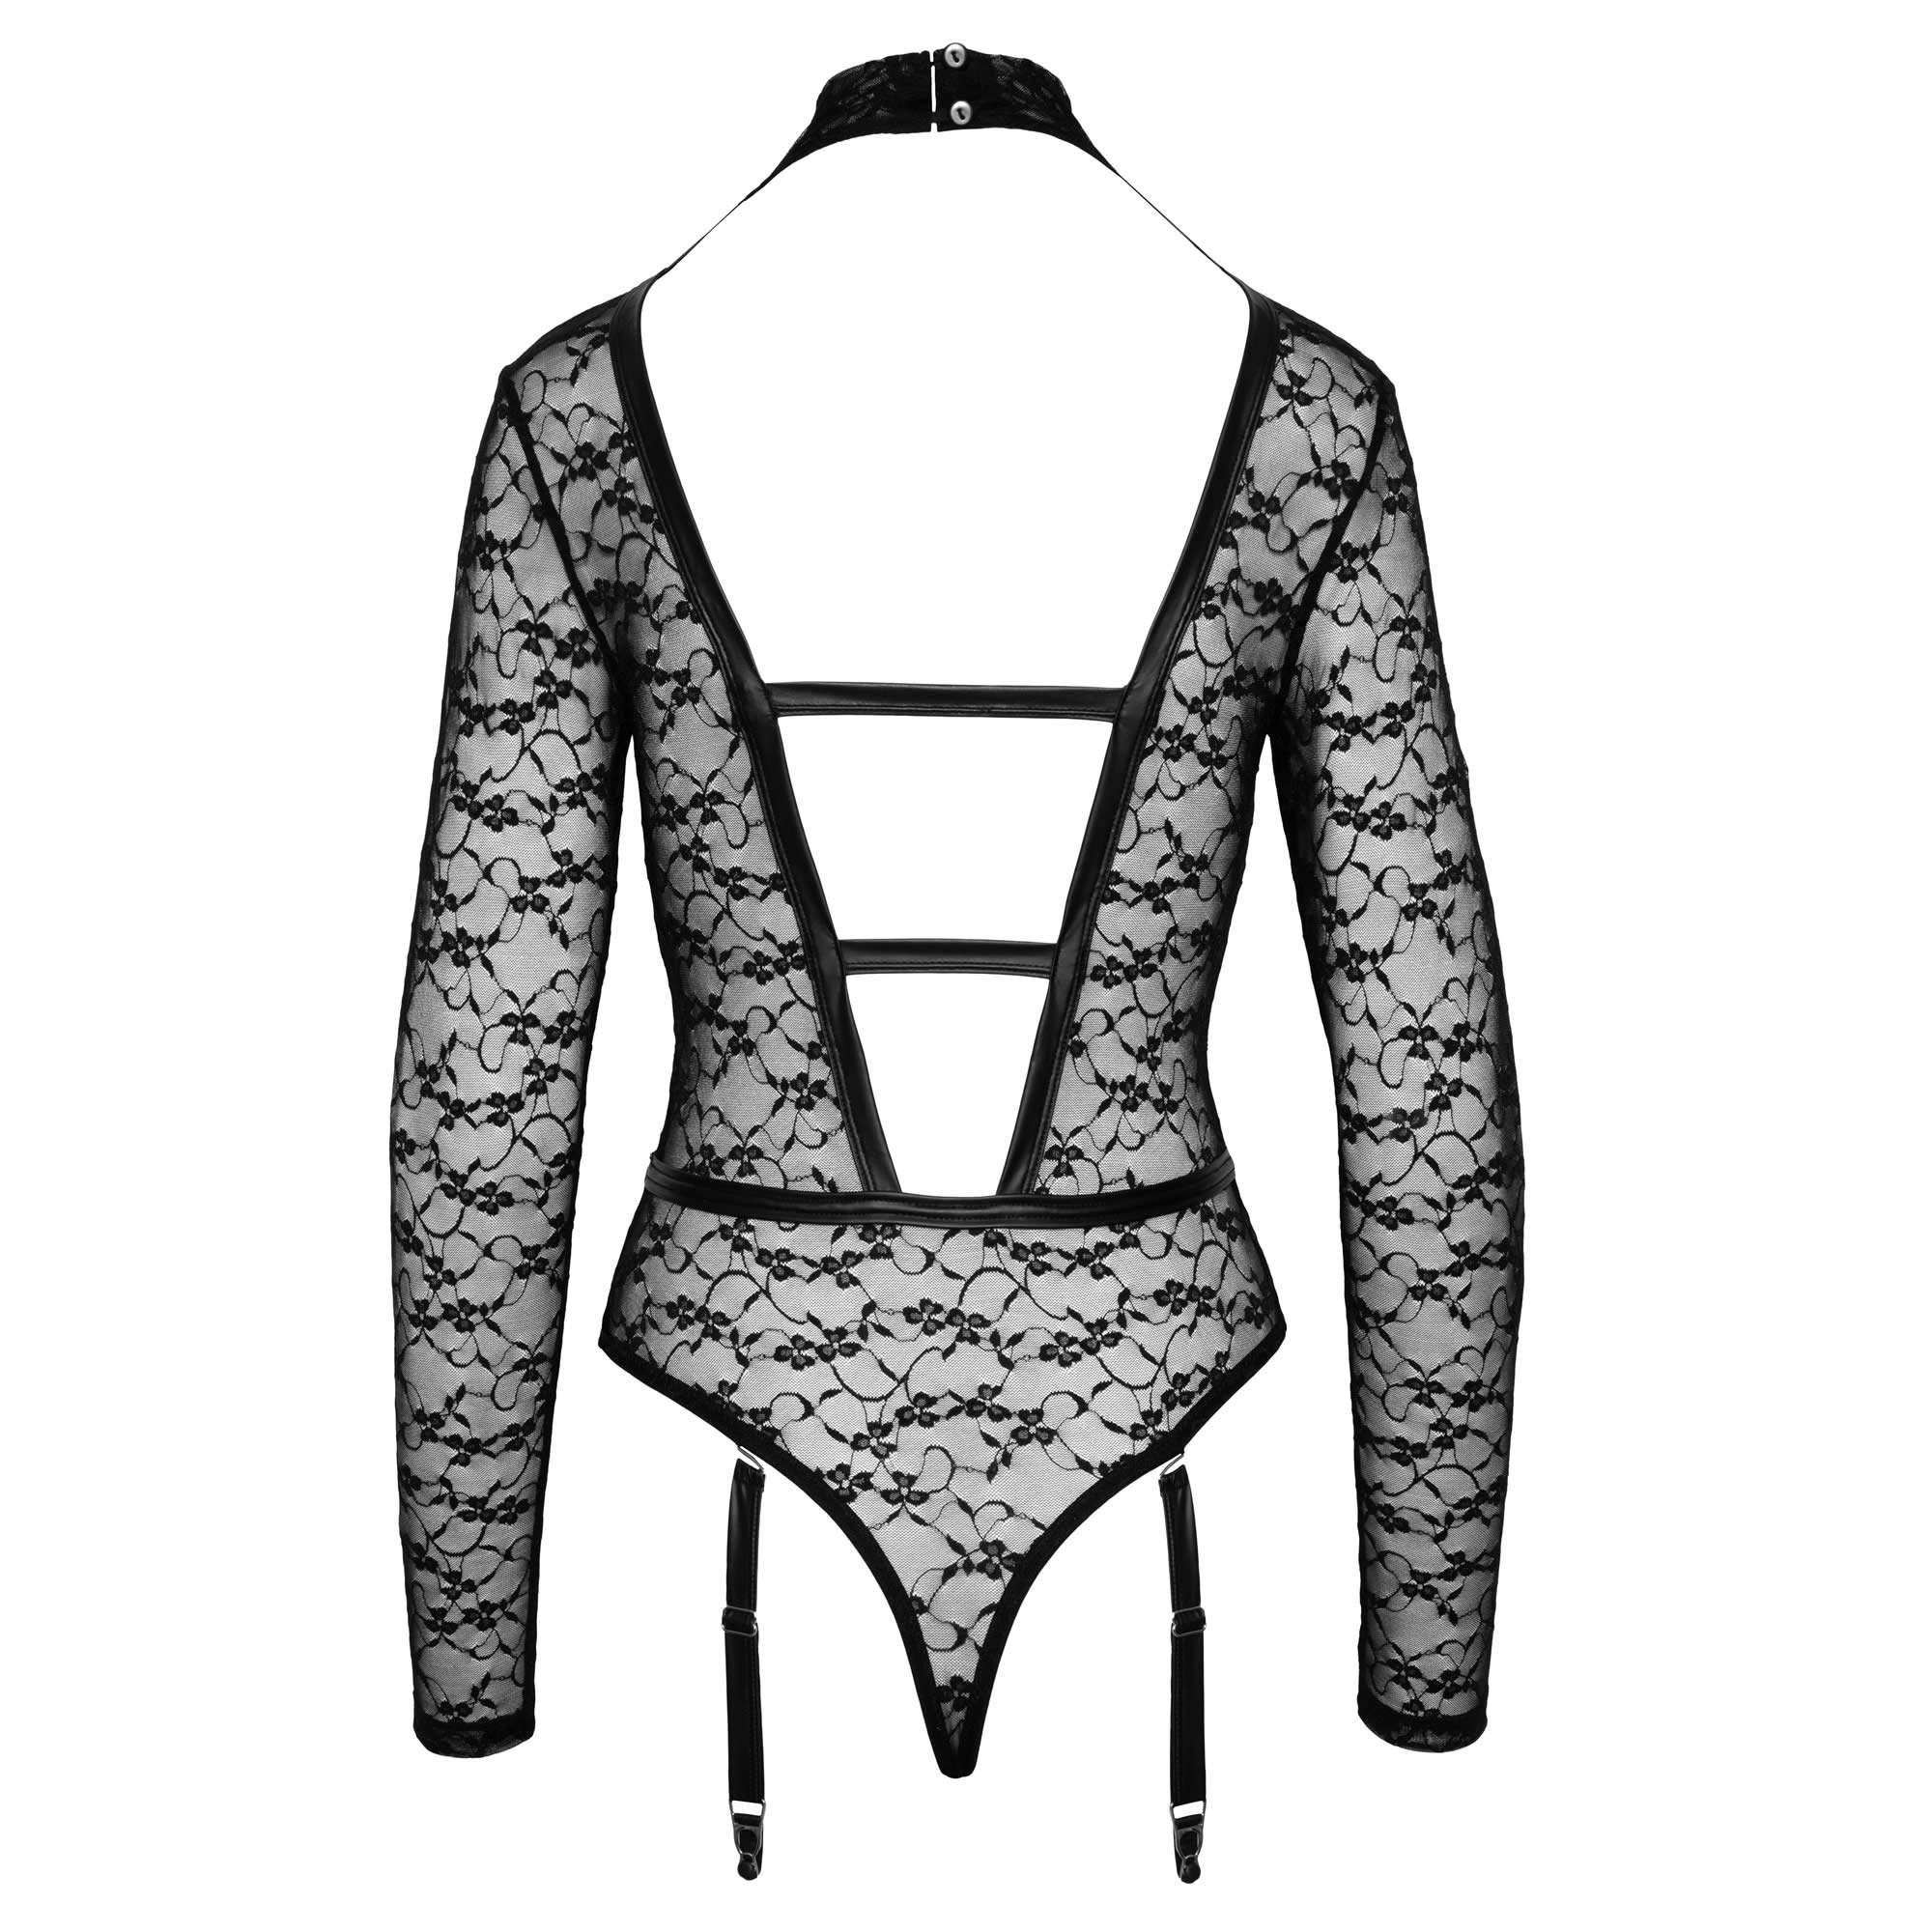 Lace Body with Wetlook Harness and Suspenders